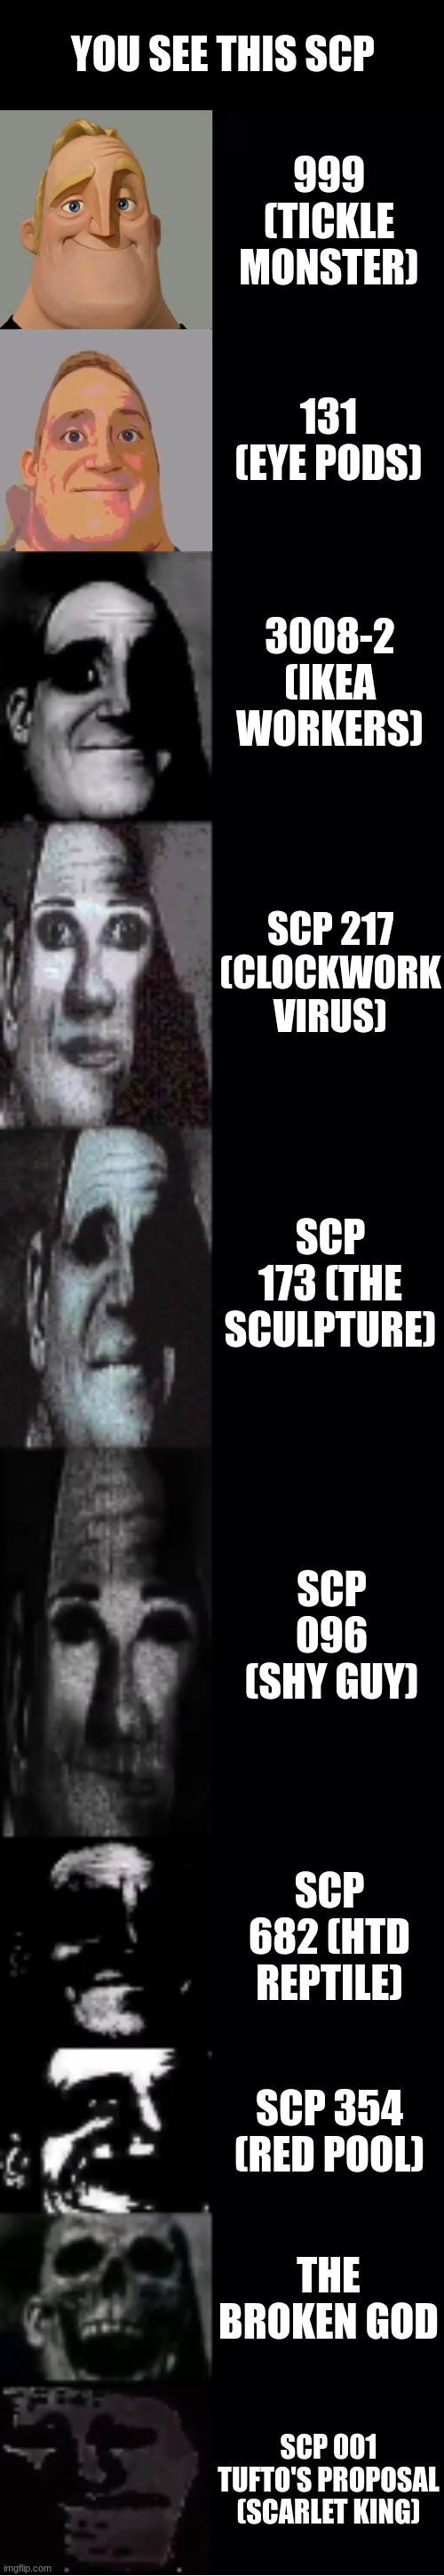 mr incredible becoming uncanny | YOU SEE THIS SCP; 999 (TICKLE MONSTER); 131 (EYE PODS); 3008-2 (IKEA WORKERS); SCP 217 (CLOCKWORK VIRUS); SCP 173 (THE SCULPTURE); SCP 096 (SHY GUY); SCP 682 (HTD REPTILE); SCP 354 (RED POOL); THE BROKEN GOD; SCP 001 TUFTO'S PROPOSAL (SCARLET KING) | image tagged in mr incredible becoming uncanny | made w/ Imgflip meme maker